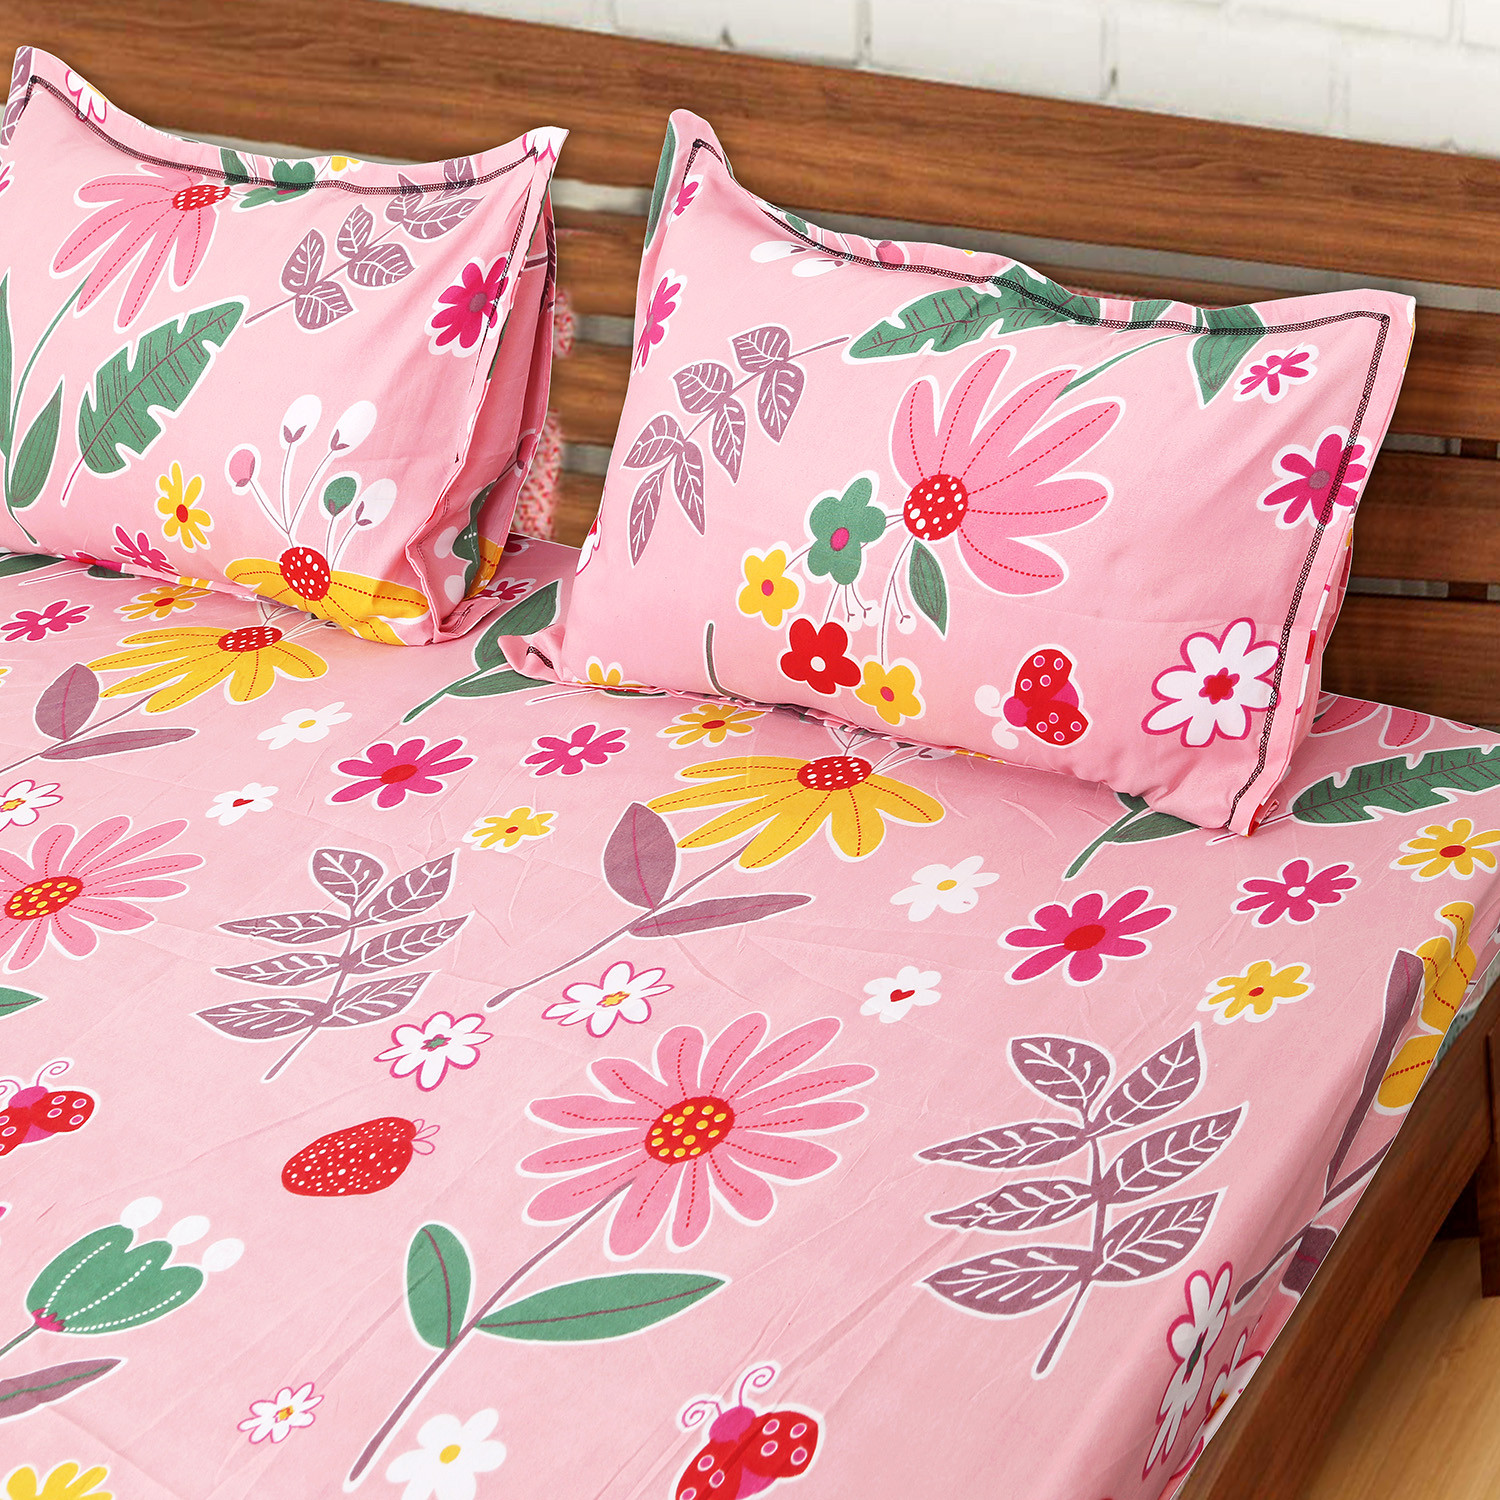 Kuber Industries Fitted Double Bedsheet|Floral Print Premium Glace Cotton Elastic Bedsheet With Two Pillow Covers,72 x 78 Inch(Pink)